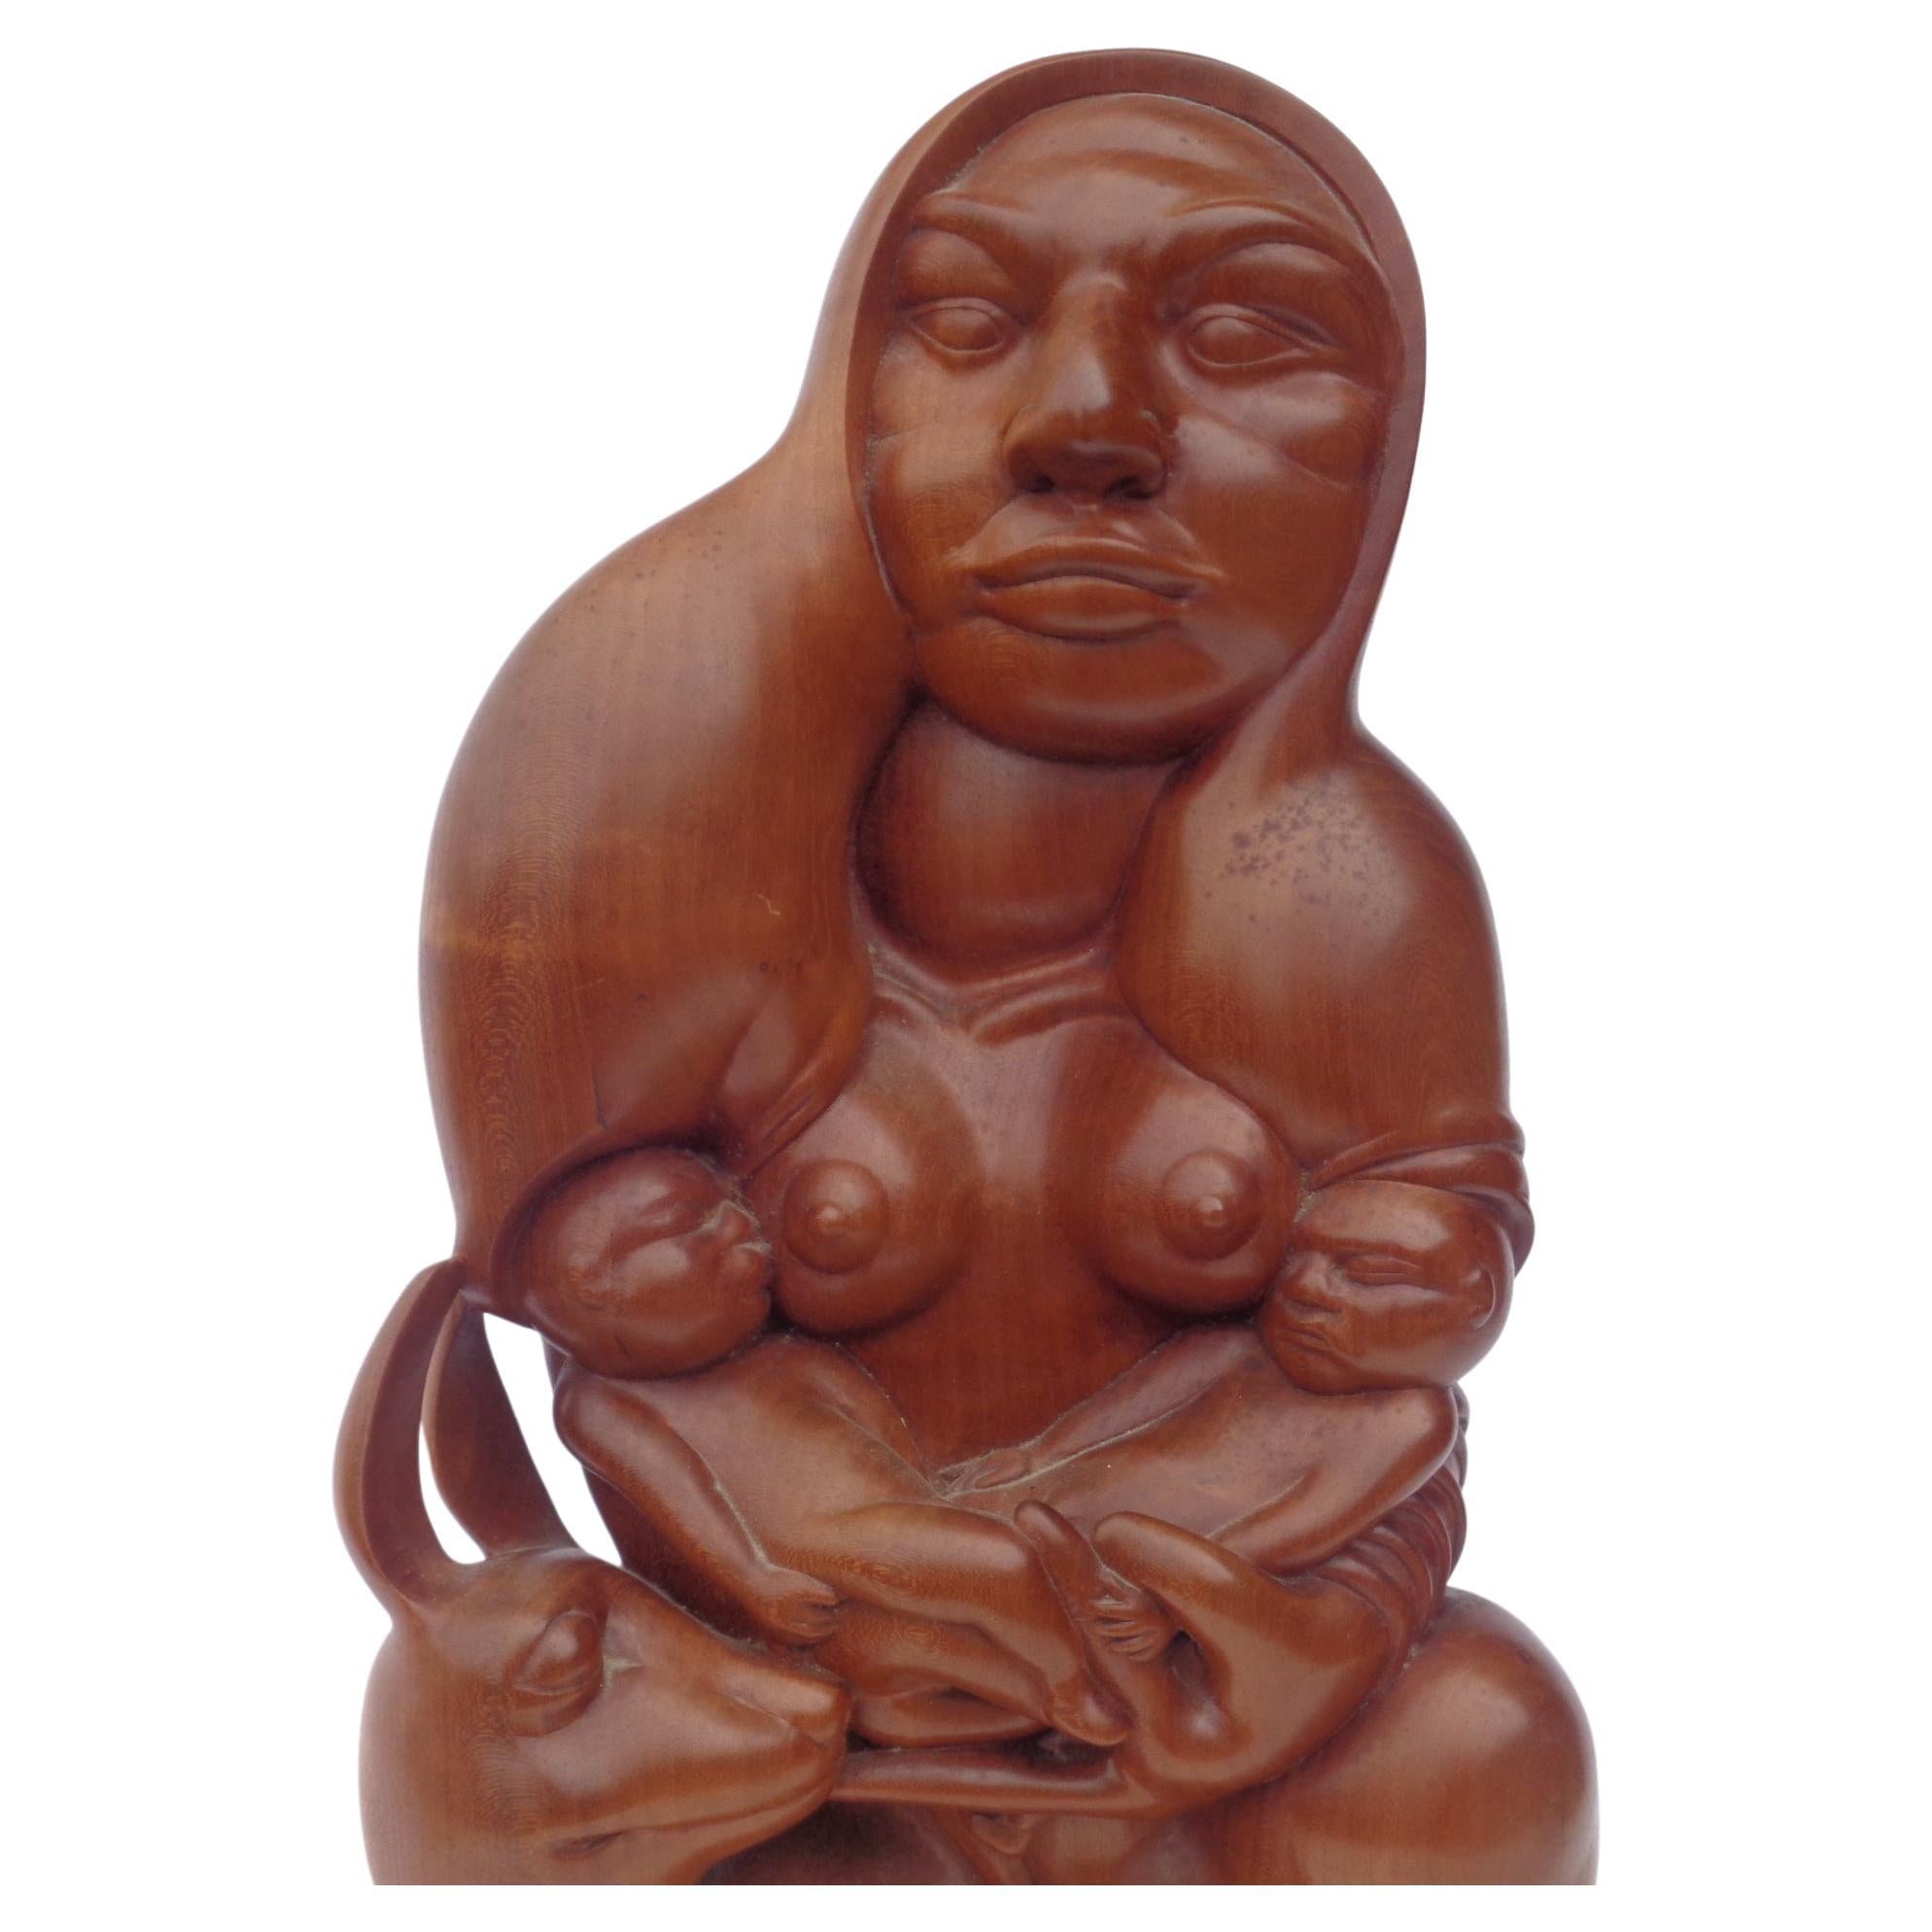 Extraordinarily fine hand carved exotic hardwood sculpture. A woman w/ llama or vicuna at her side in the process of breast feeding her two infants as she cradles them in her arms. Bold powerful imagery. In the manner of Diego Rivera. Latin America